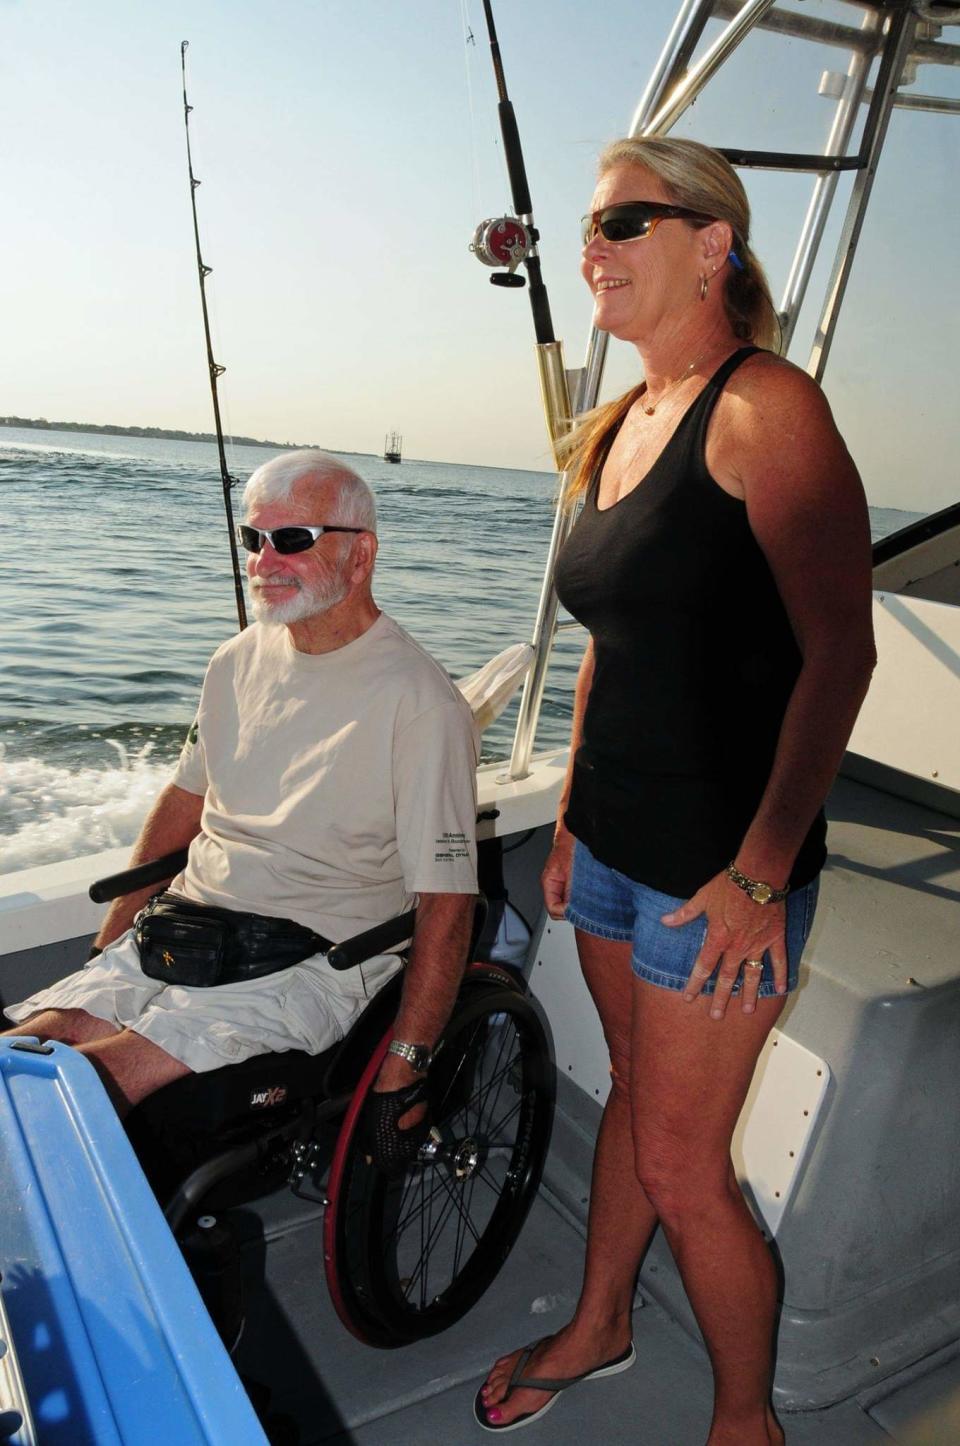 George Saint Hilaire, an Air Force veteran from Sanford, Maine, and Carol Miller, first mate of the Miller Time out of Galilee, head out from Point Judith for a past deep-sea fishing clinic. This was part of an Adaptive Summer Sports Clinic hosted by the Providence VA Medical Center.